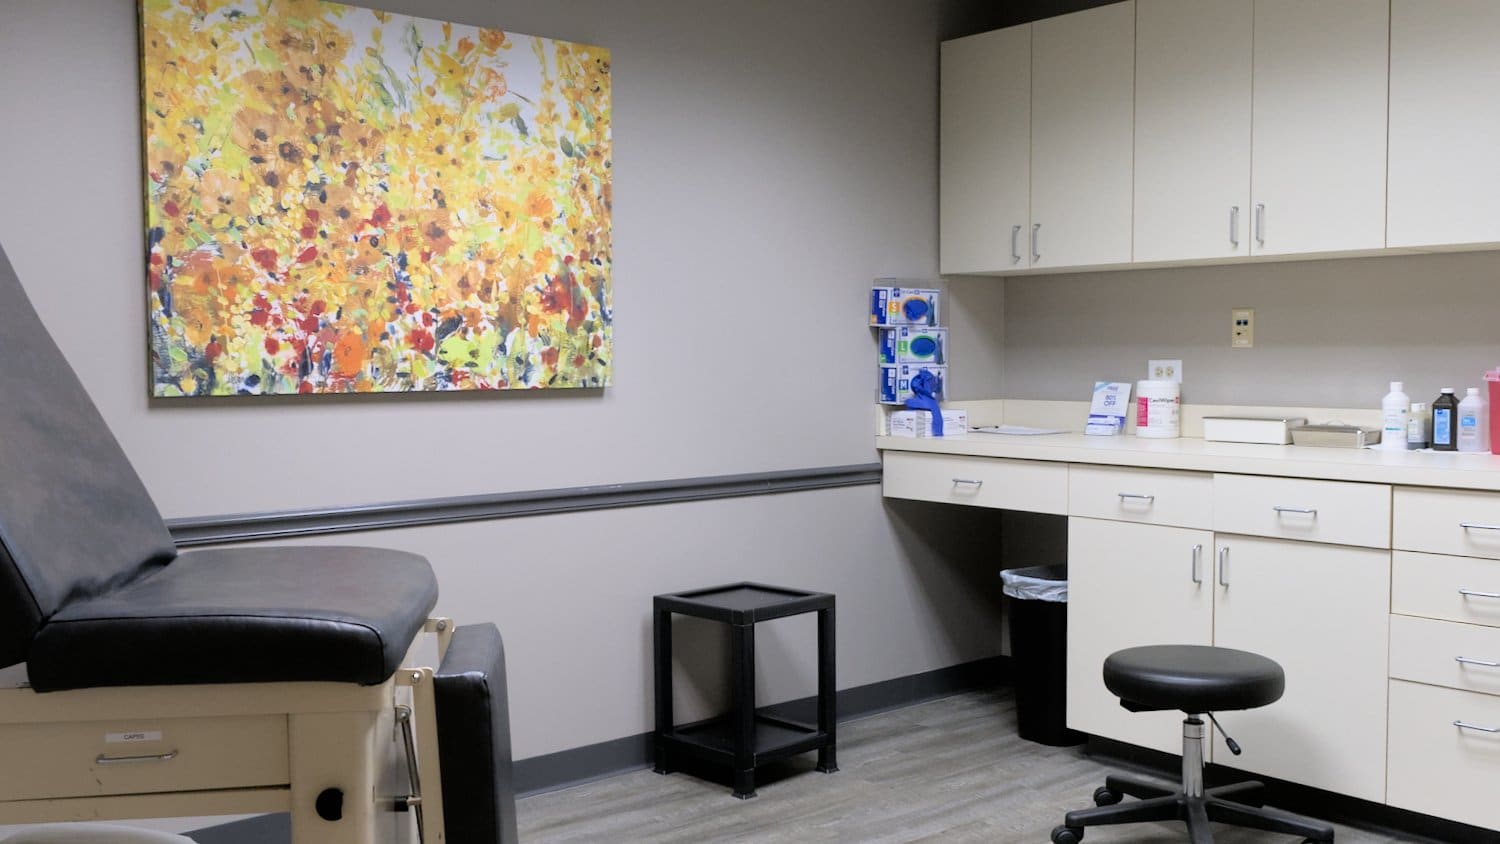 One of the medical exam rooms.